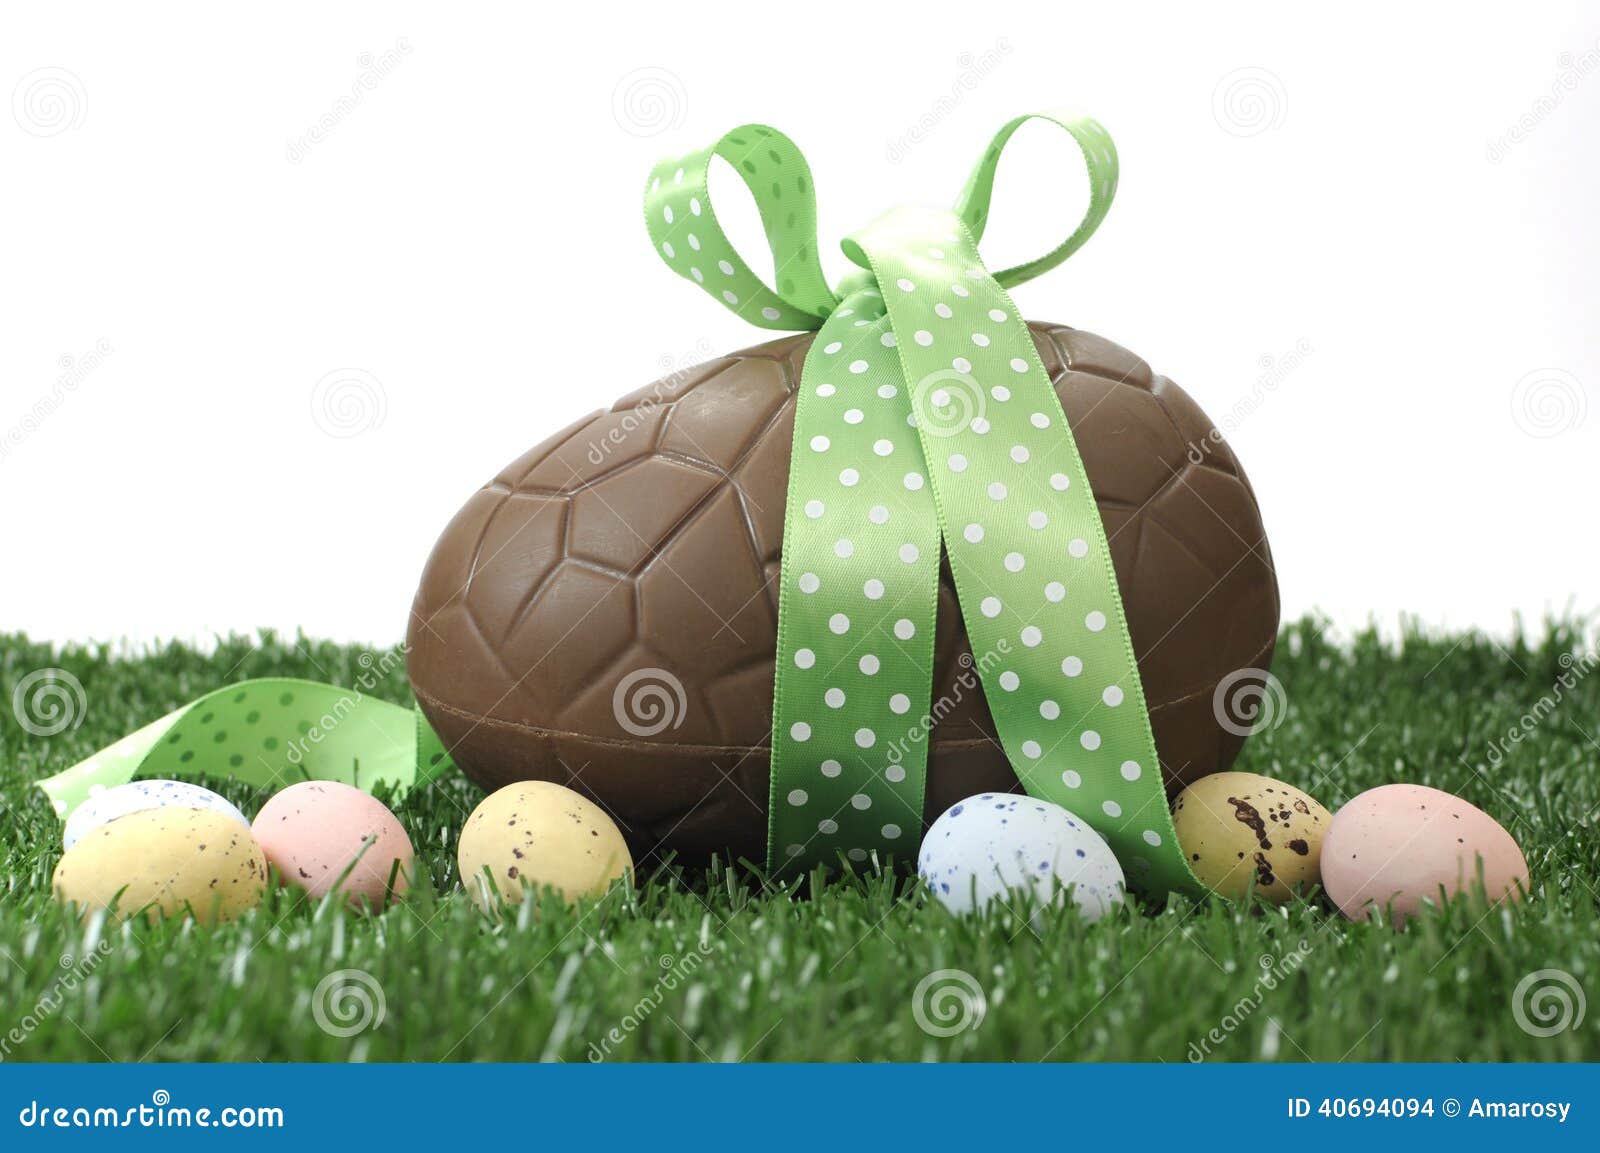 Giant Chocolate Easter Eggs